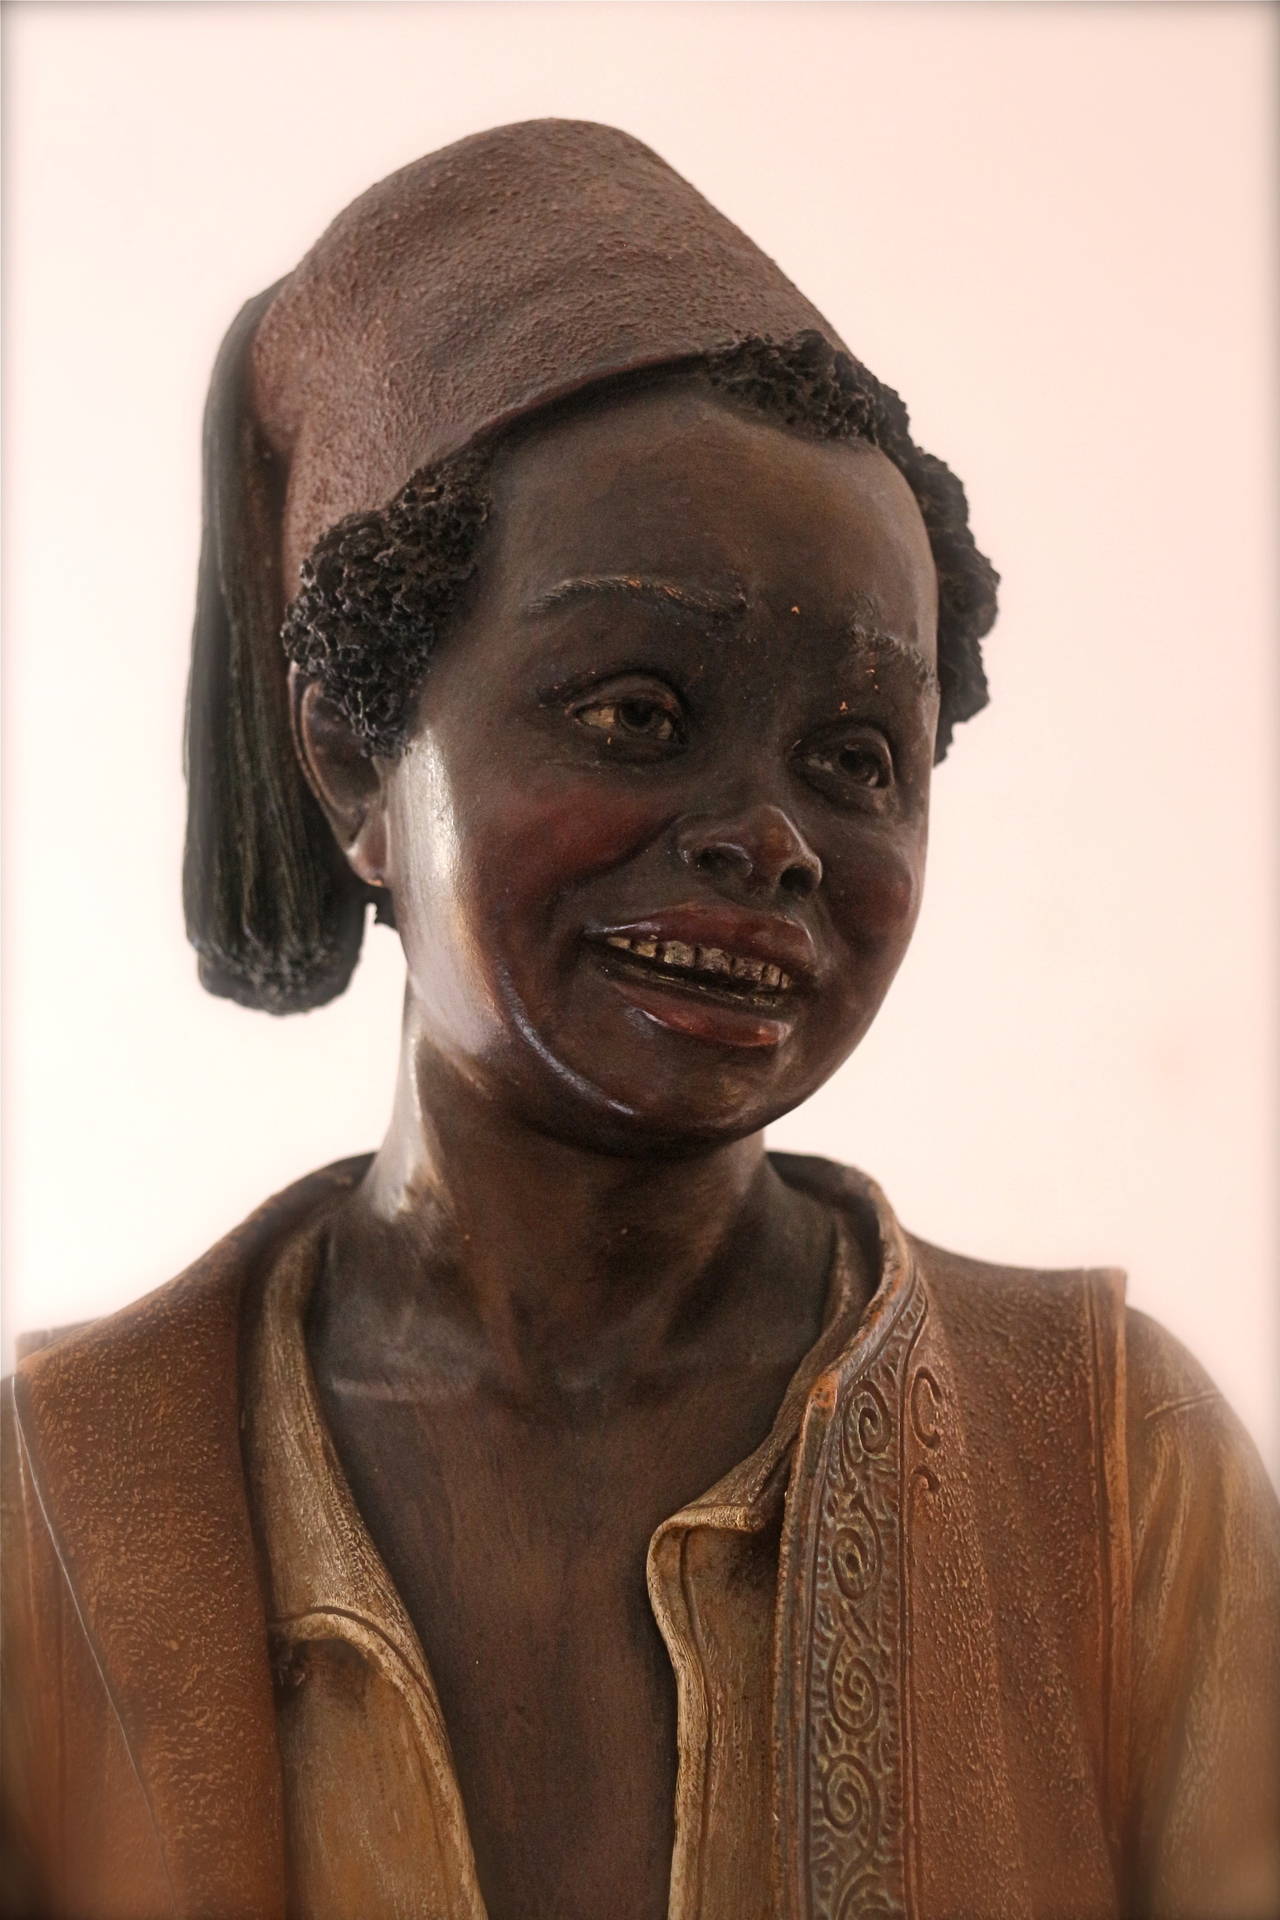 Black person holding a tray . Terra cotta , by the maker of BB 